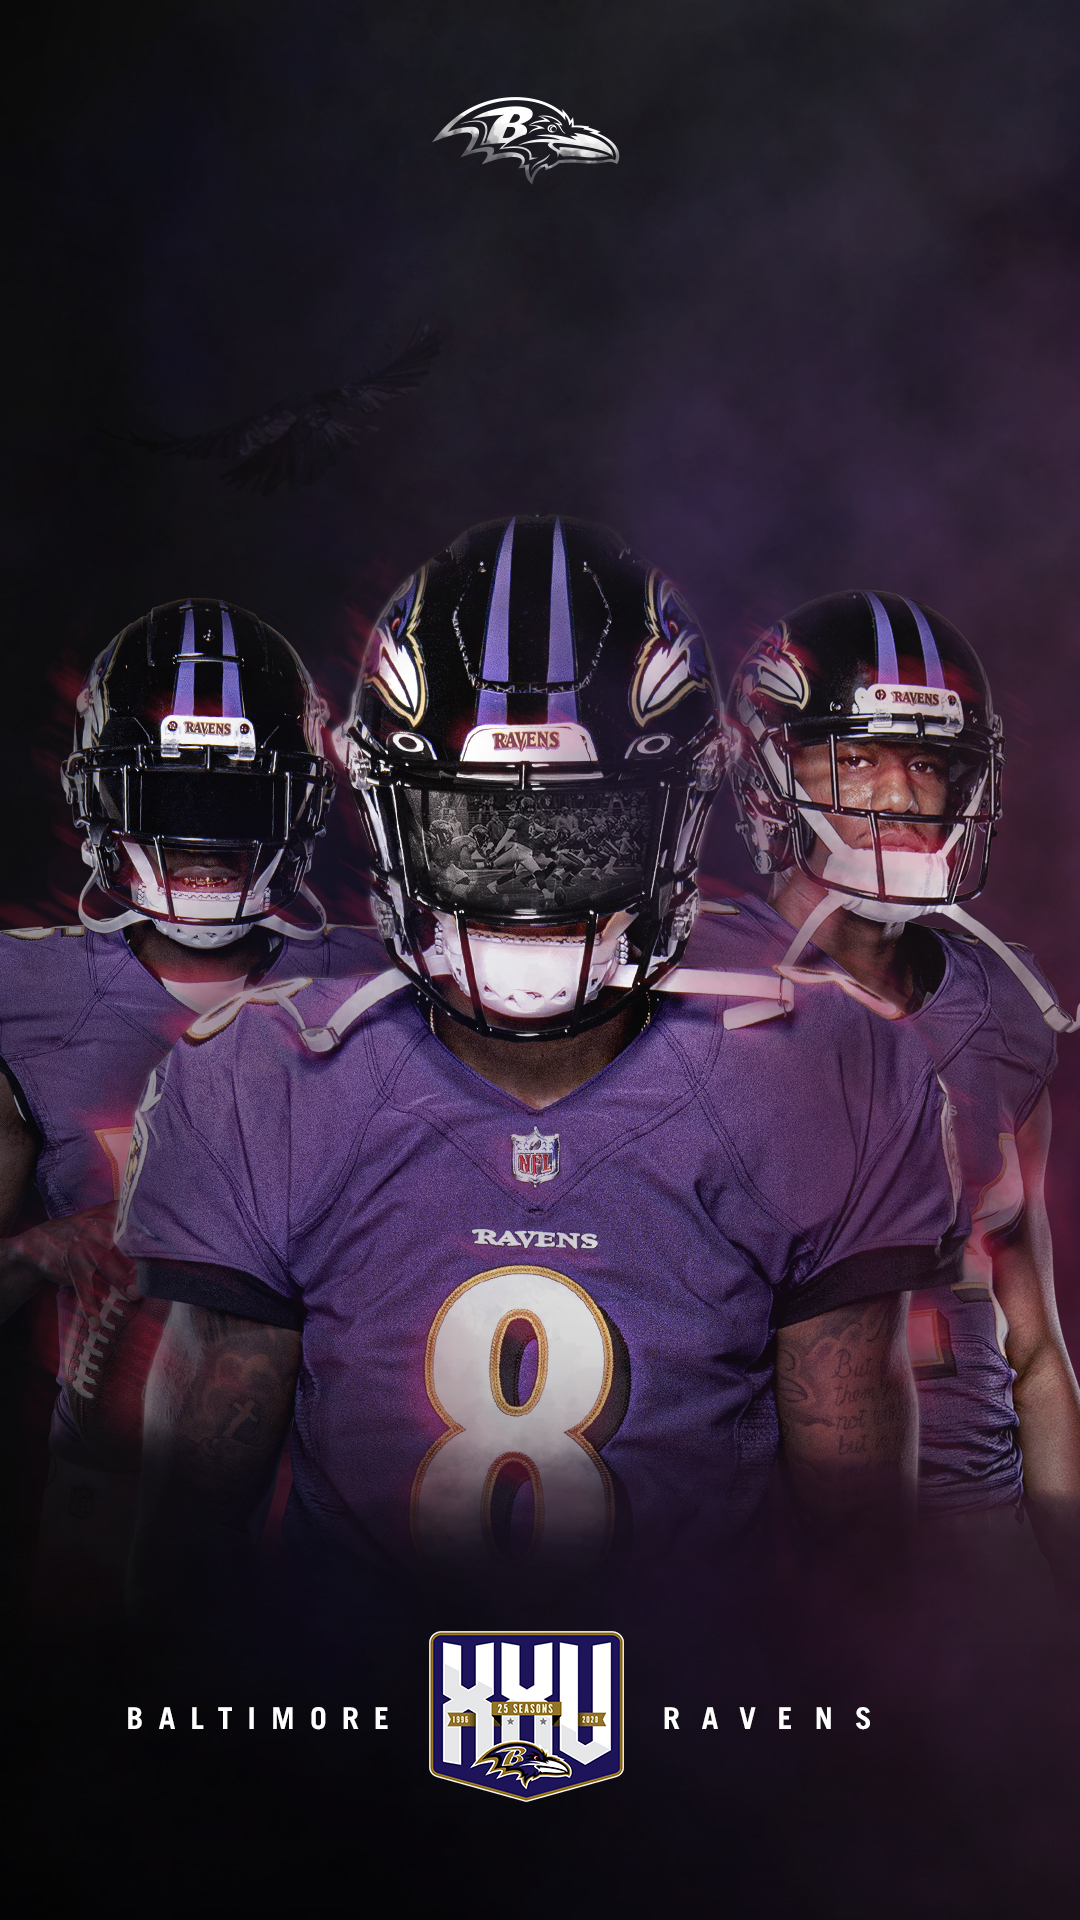 Baltimore Ravens WEEK. #WallpaperWednesday (feels so good to say that)